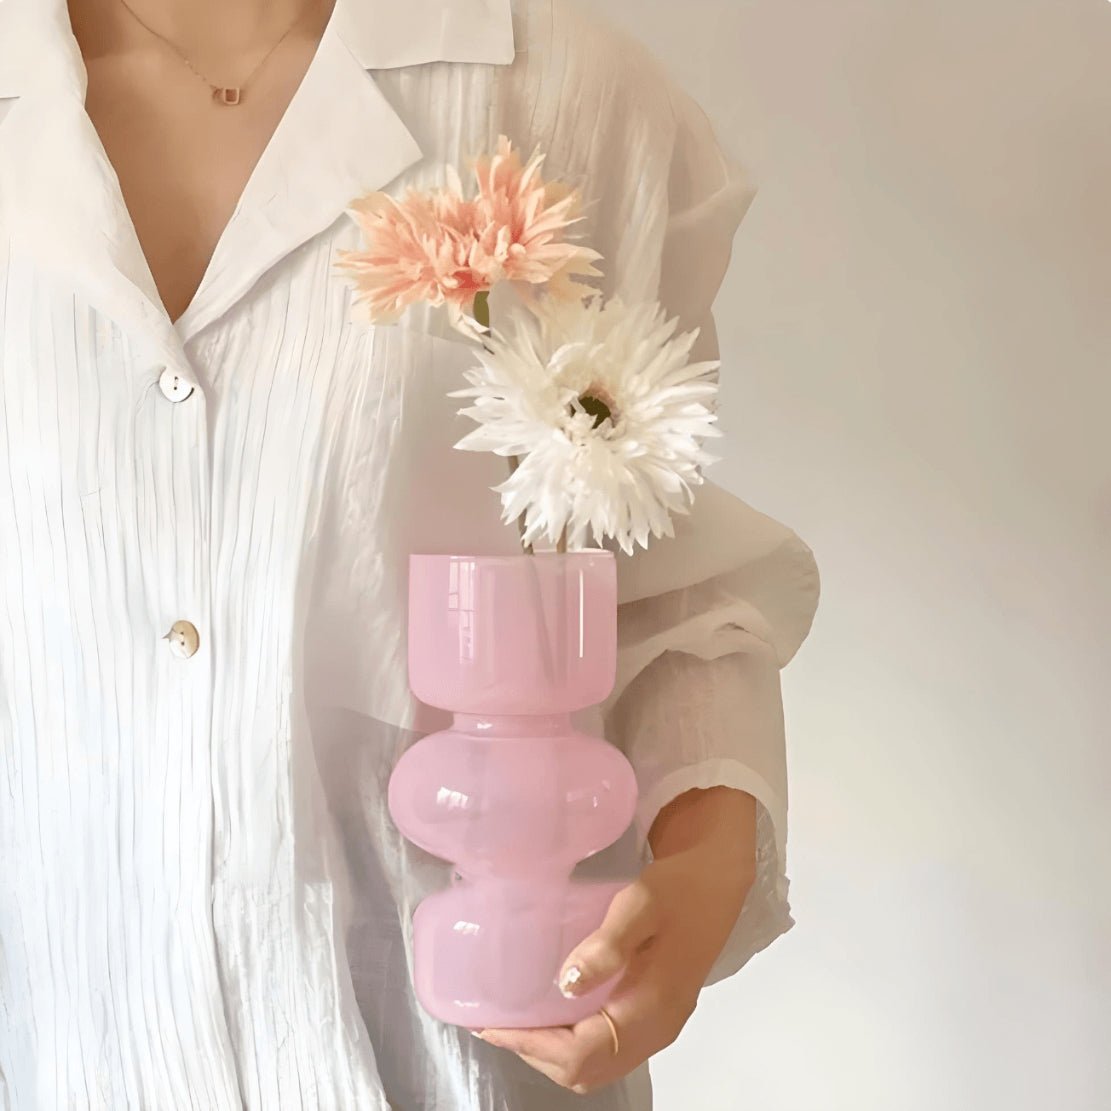 Woman holding pink geometric ball glass vase with white flowers